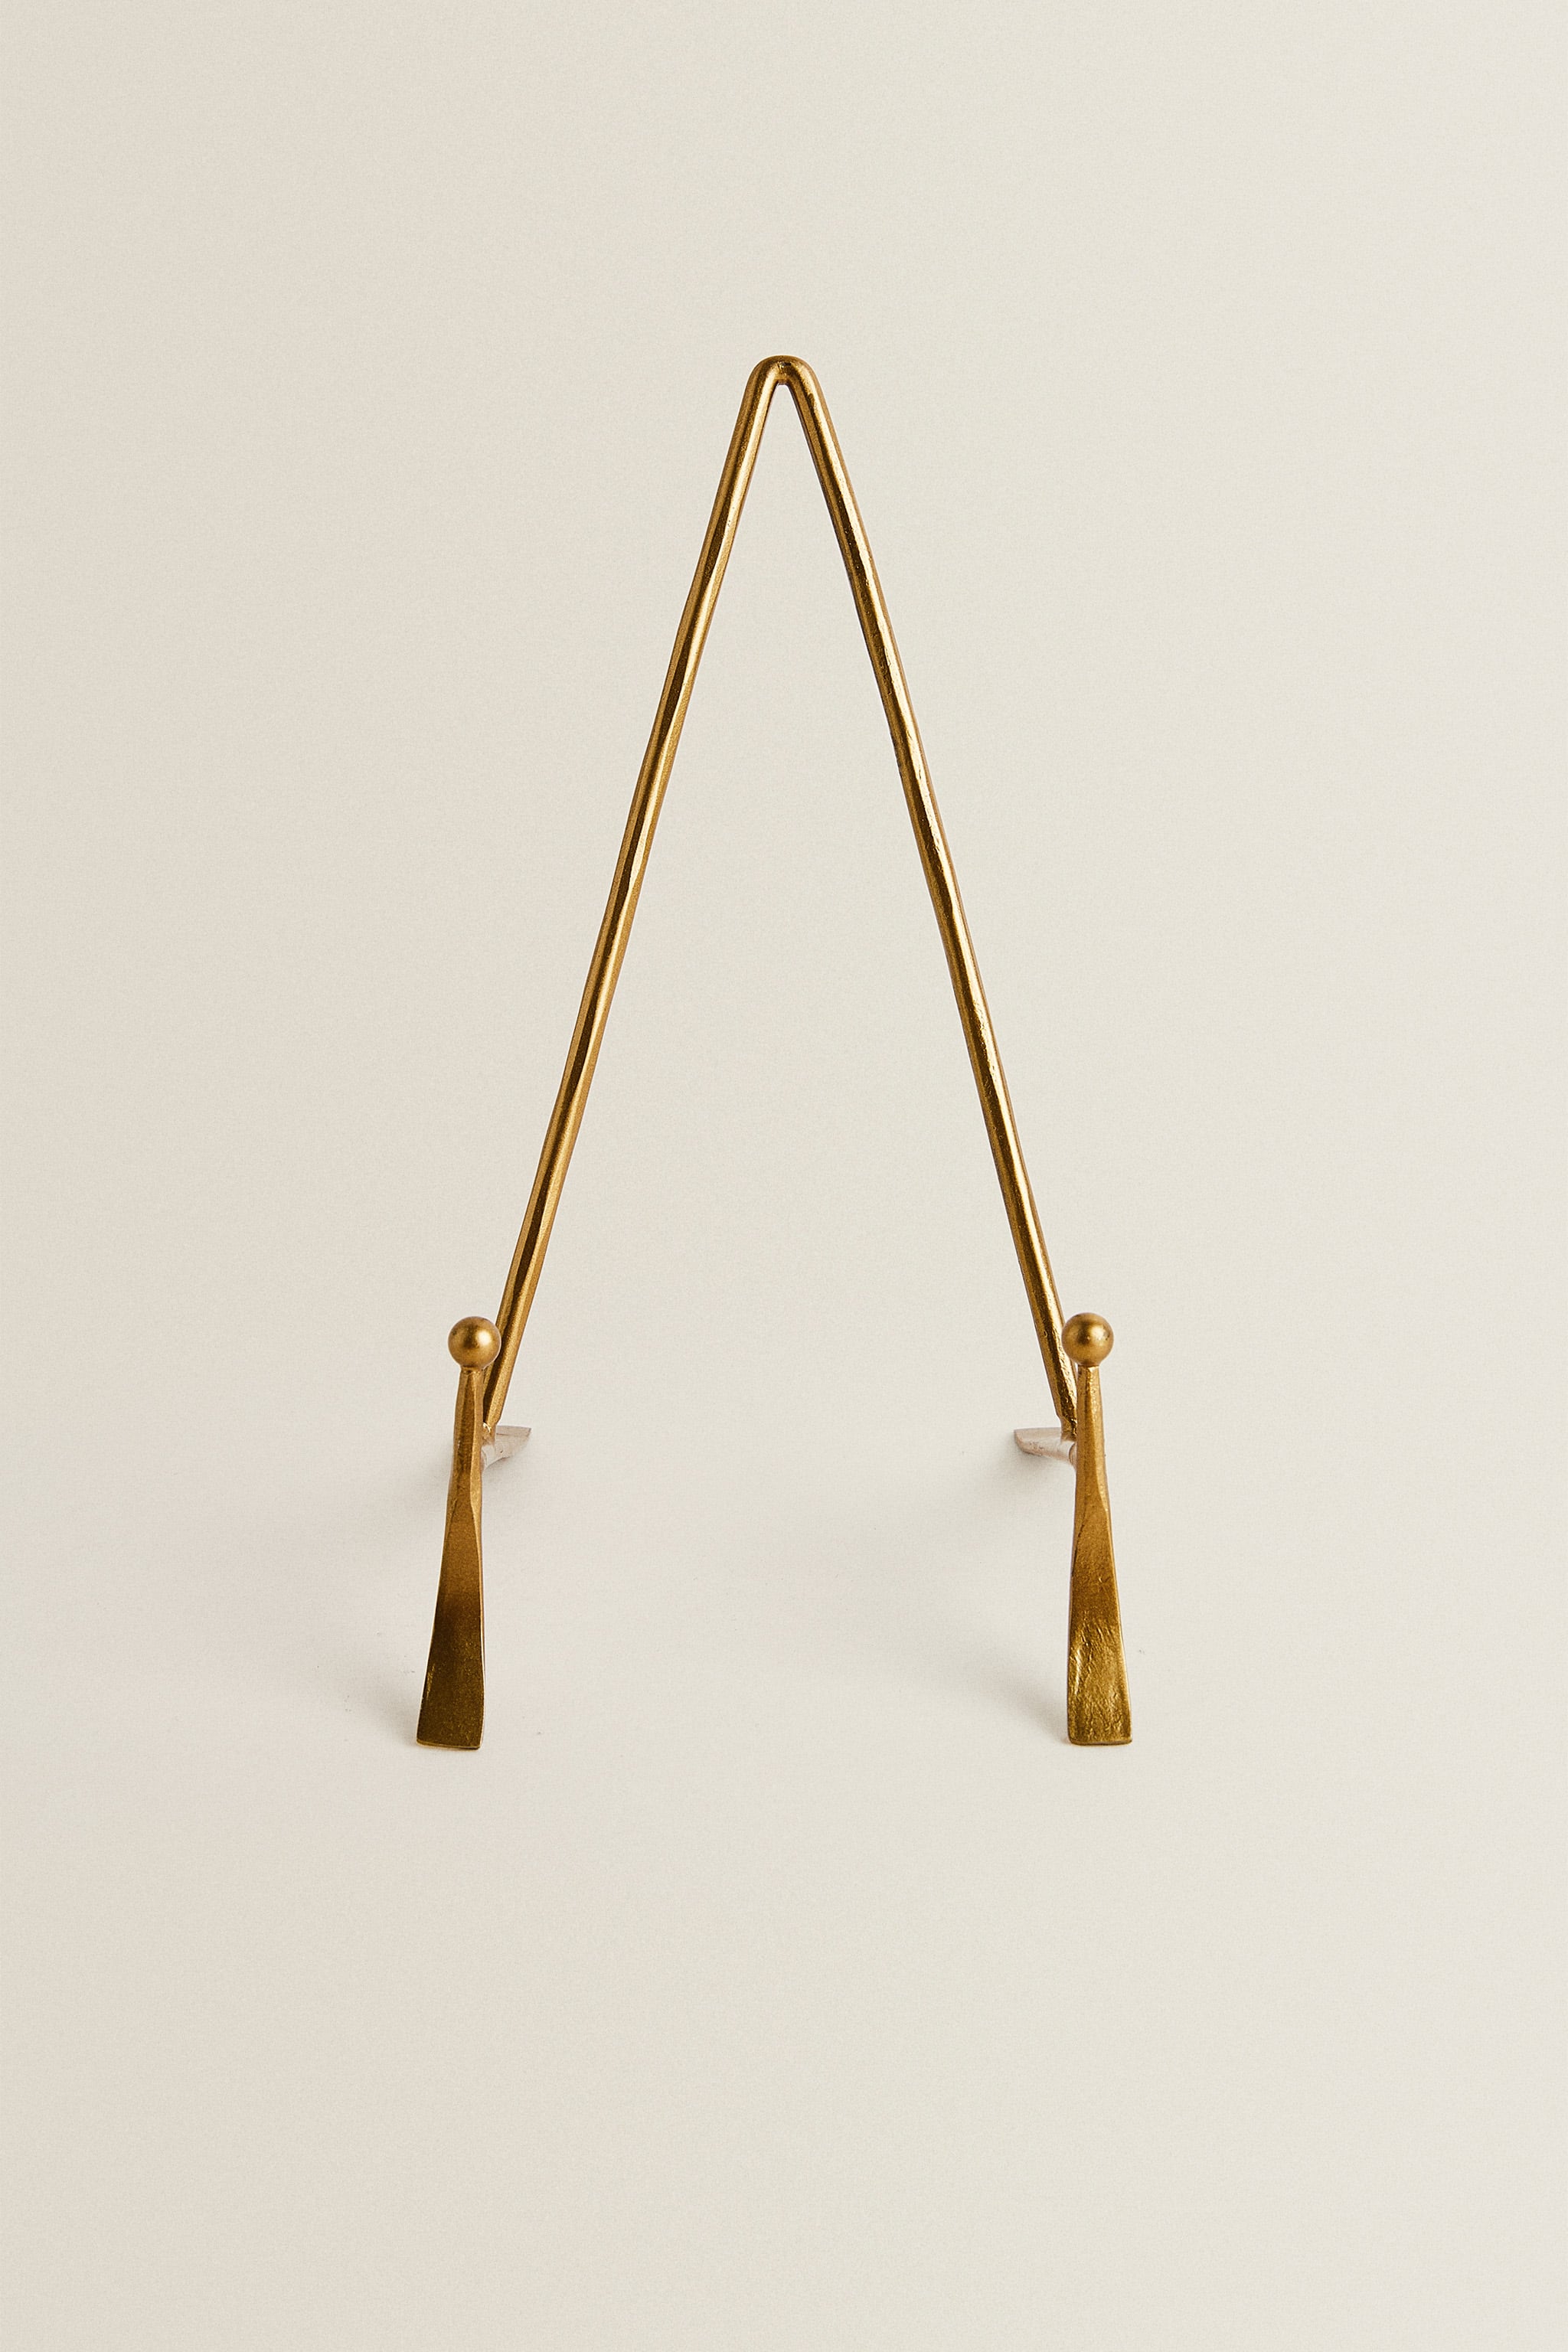 GOLD METAL DISPLAY STAND